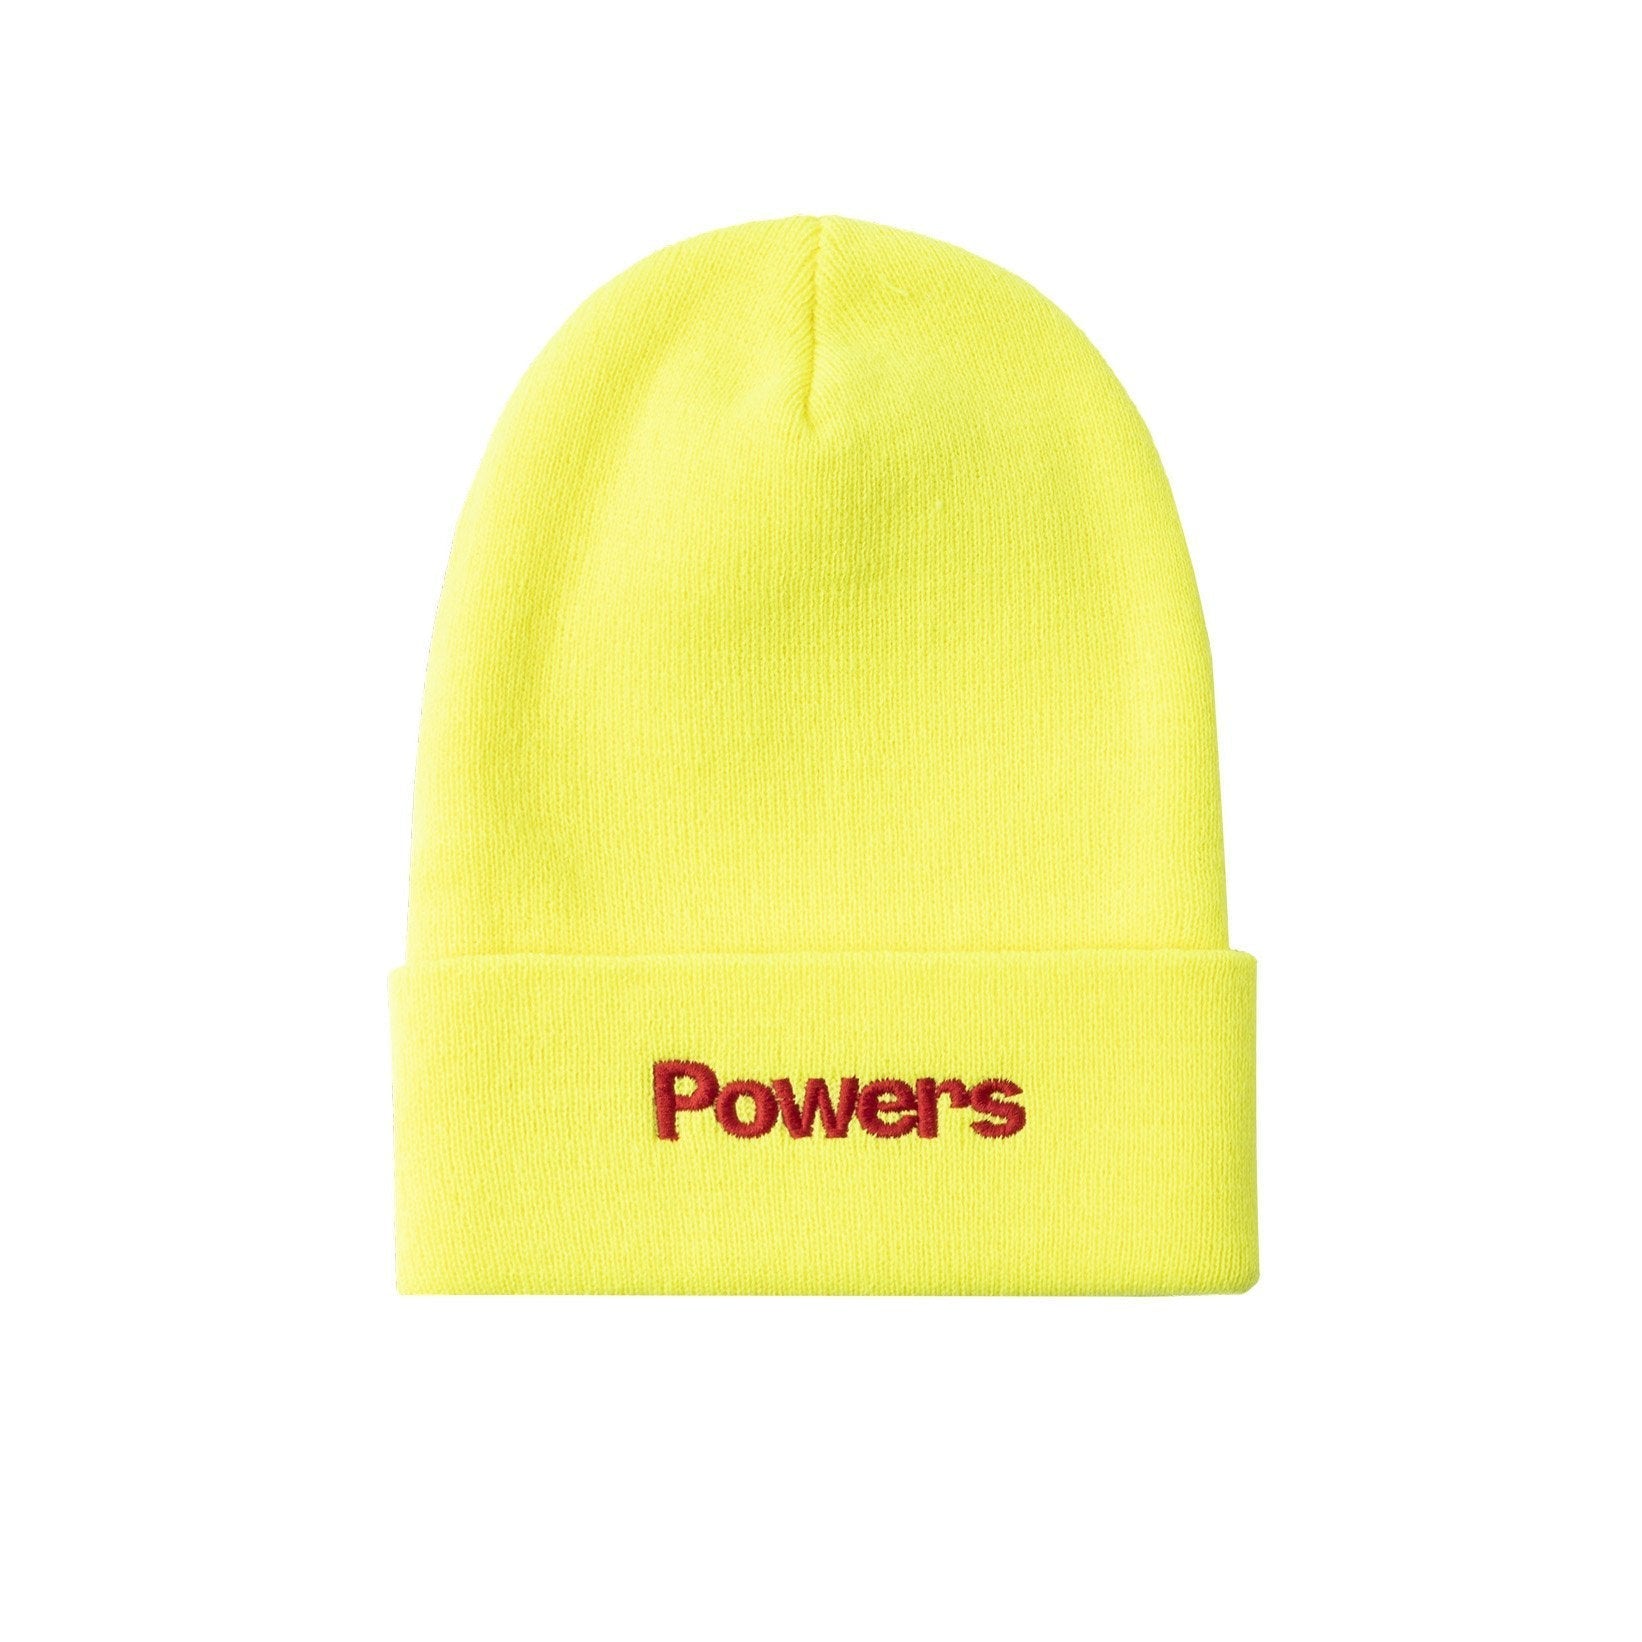 POWERS SIMPLE LOGO BEANIE - Safety Yellow